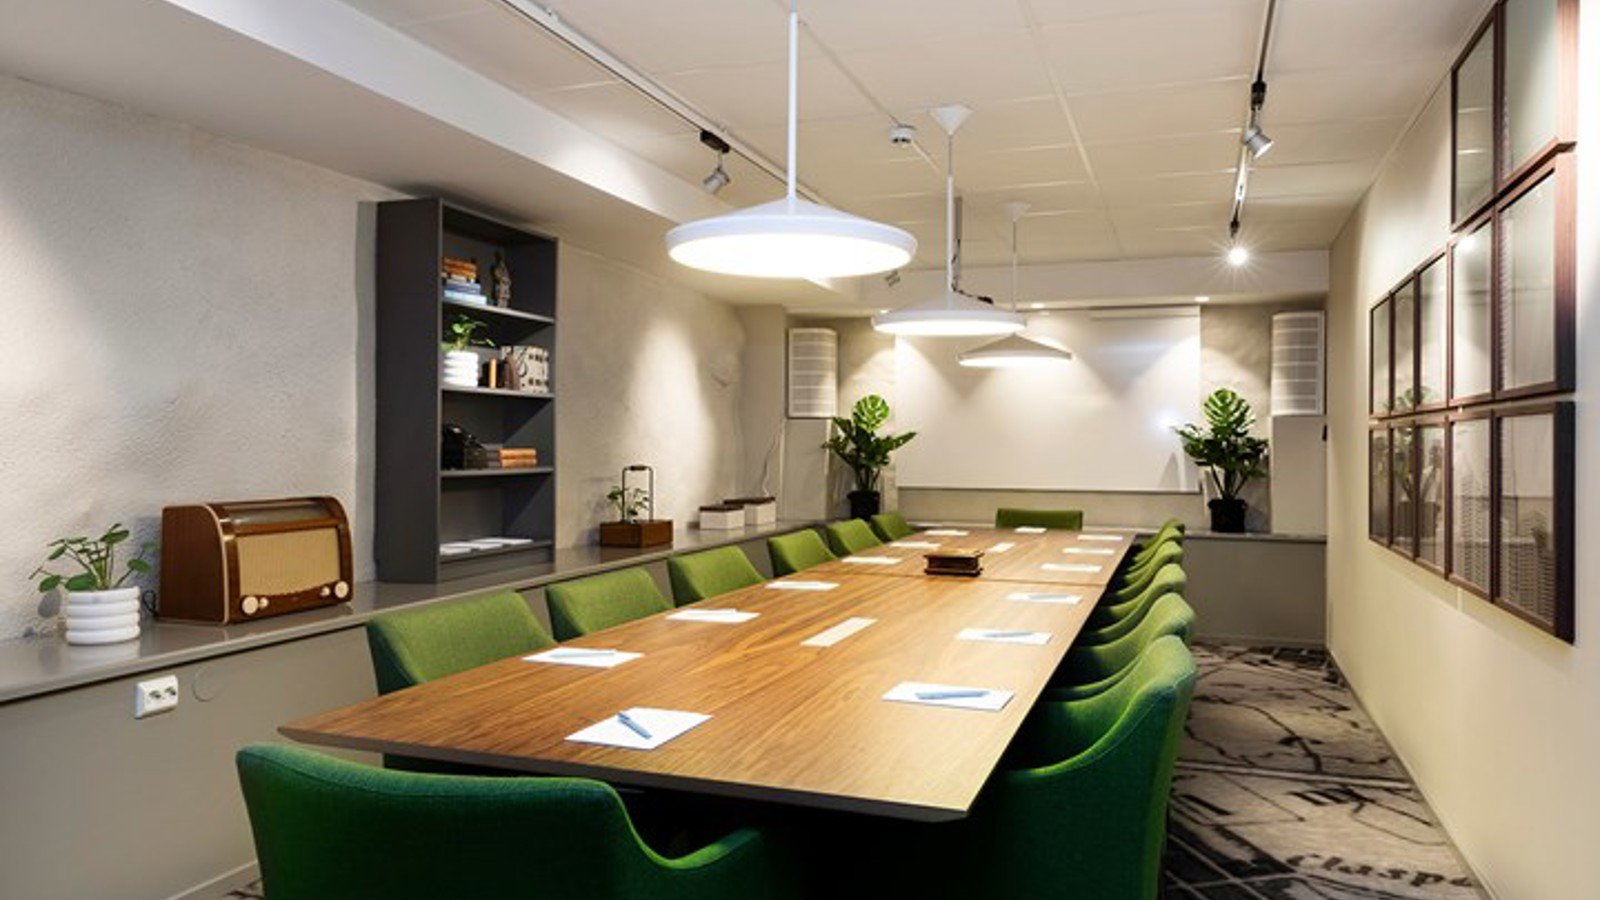 Conference room with board seating, dark brown table and green chairs